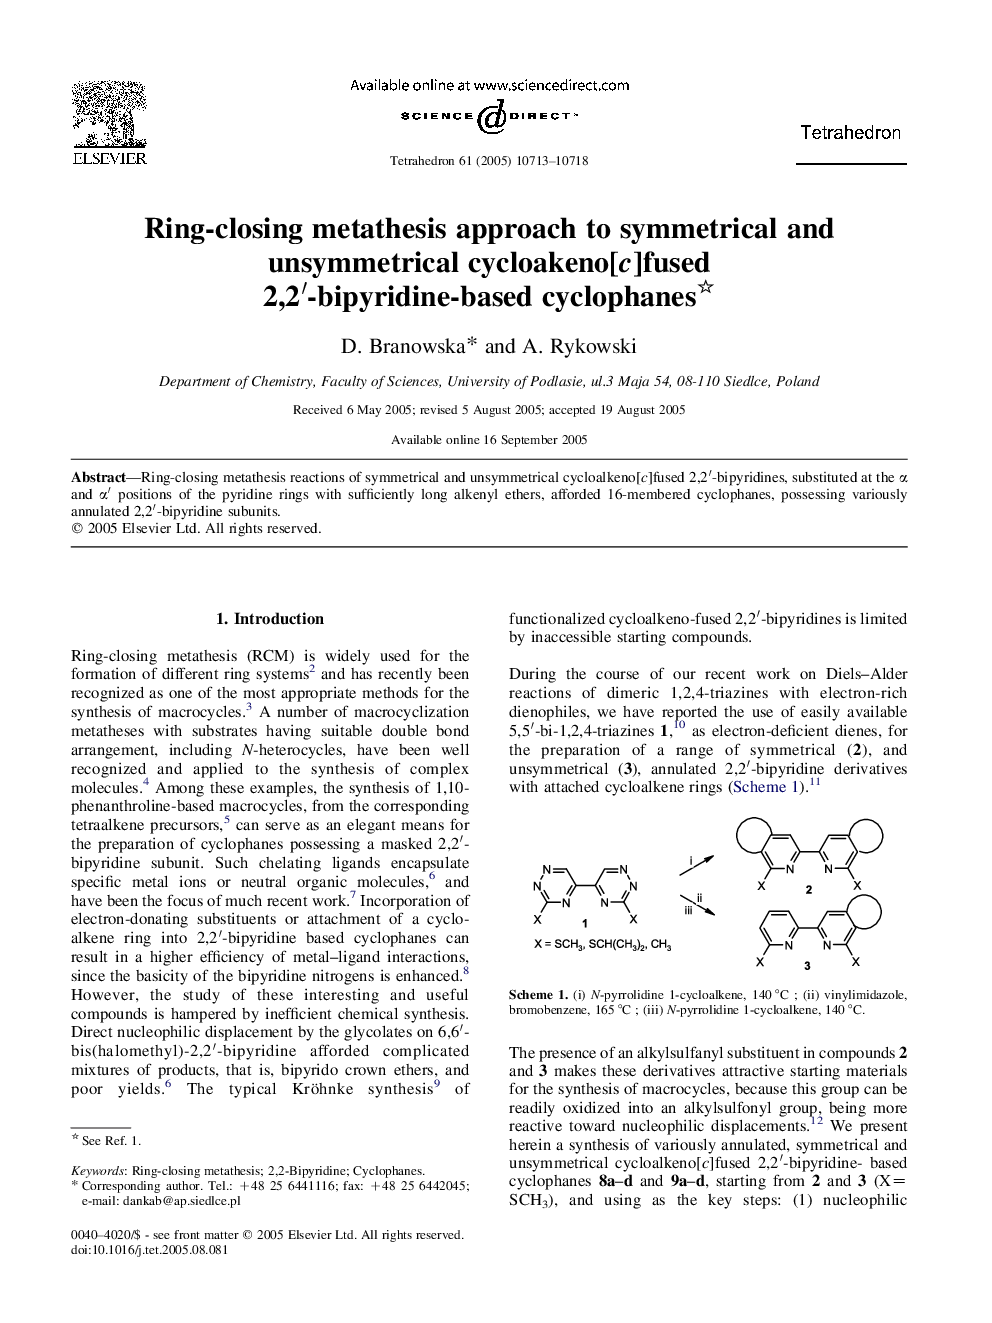 Ring-closing metathesis approach to symmetrical and unsymmetrical cycloakeno[c]fused 2,2â²-bipyridine-based cyclophanes